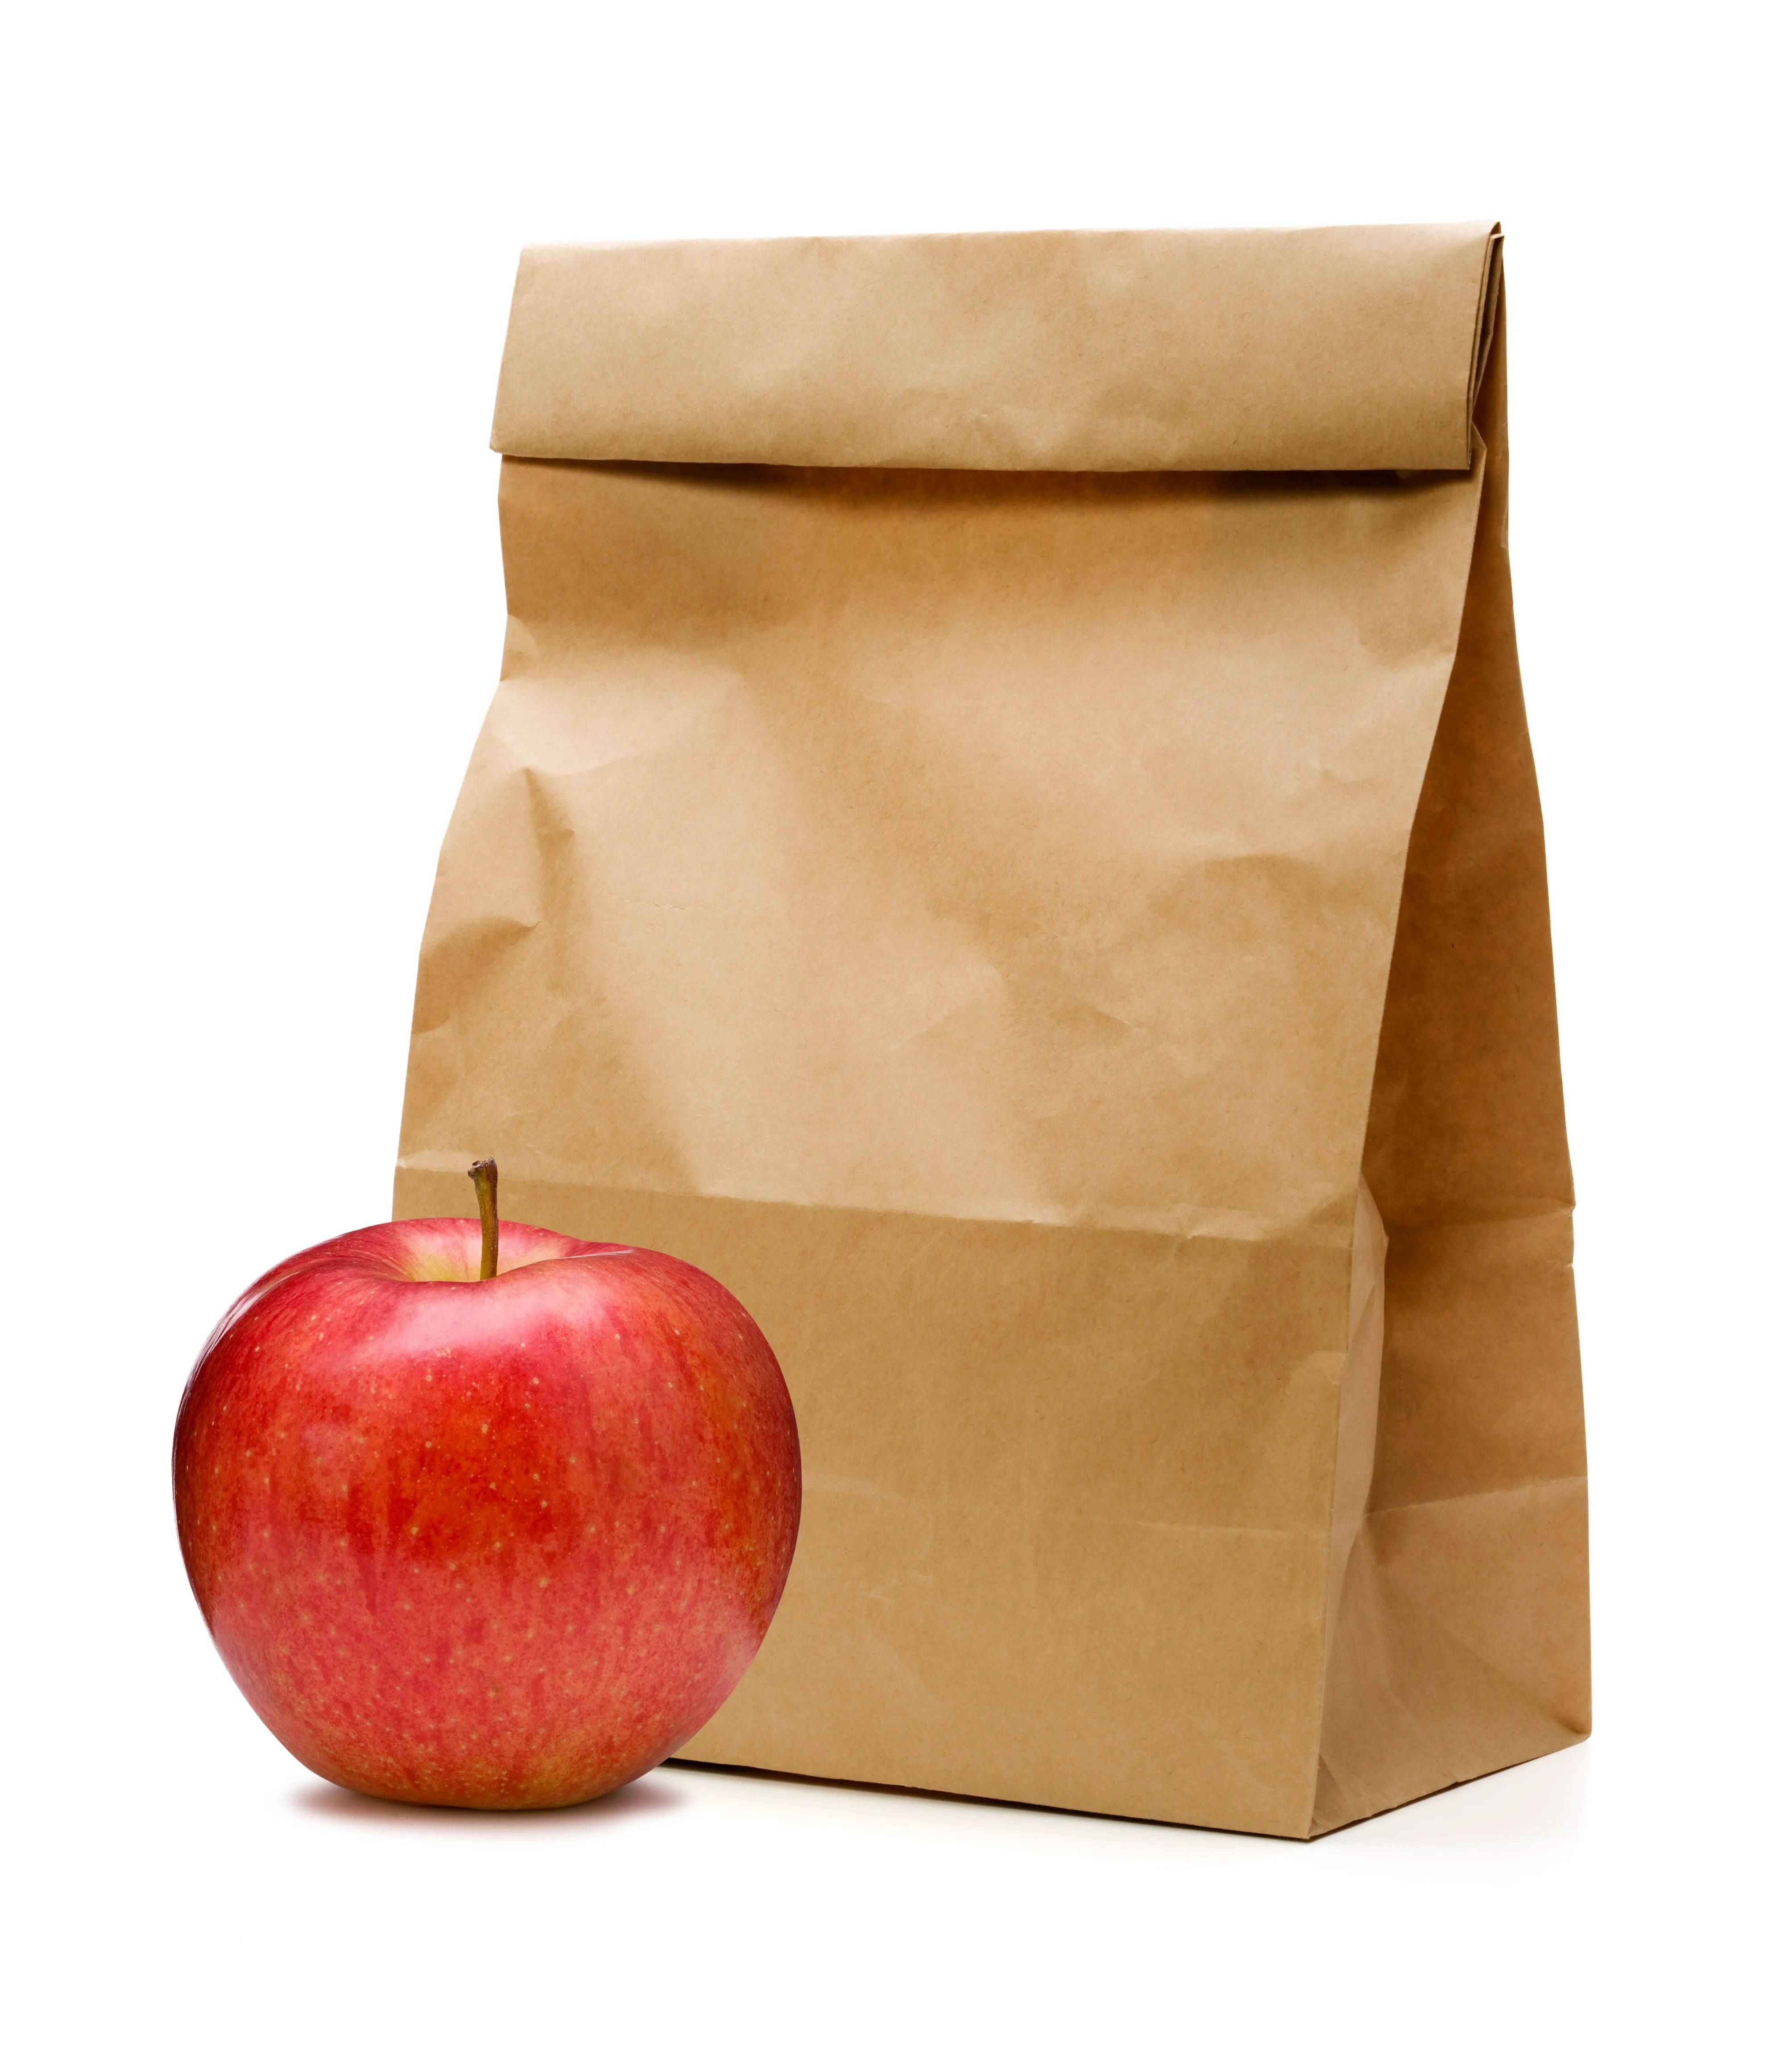 Apple, Bags, Apple Official Small Paper Bag White Gray